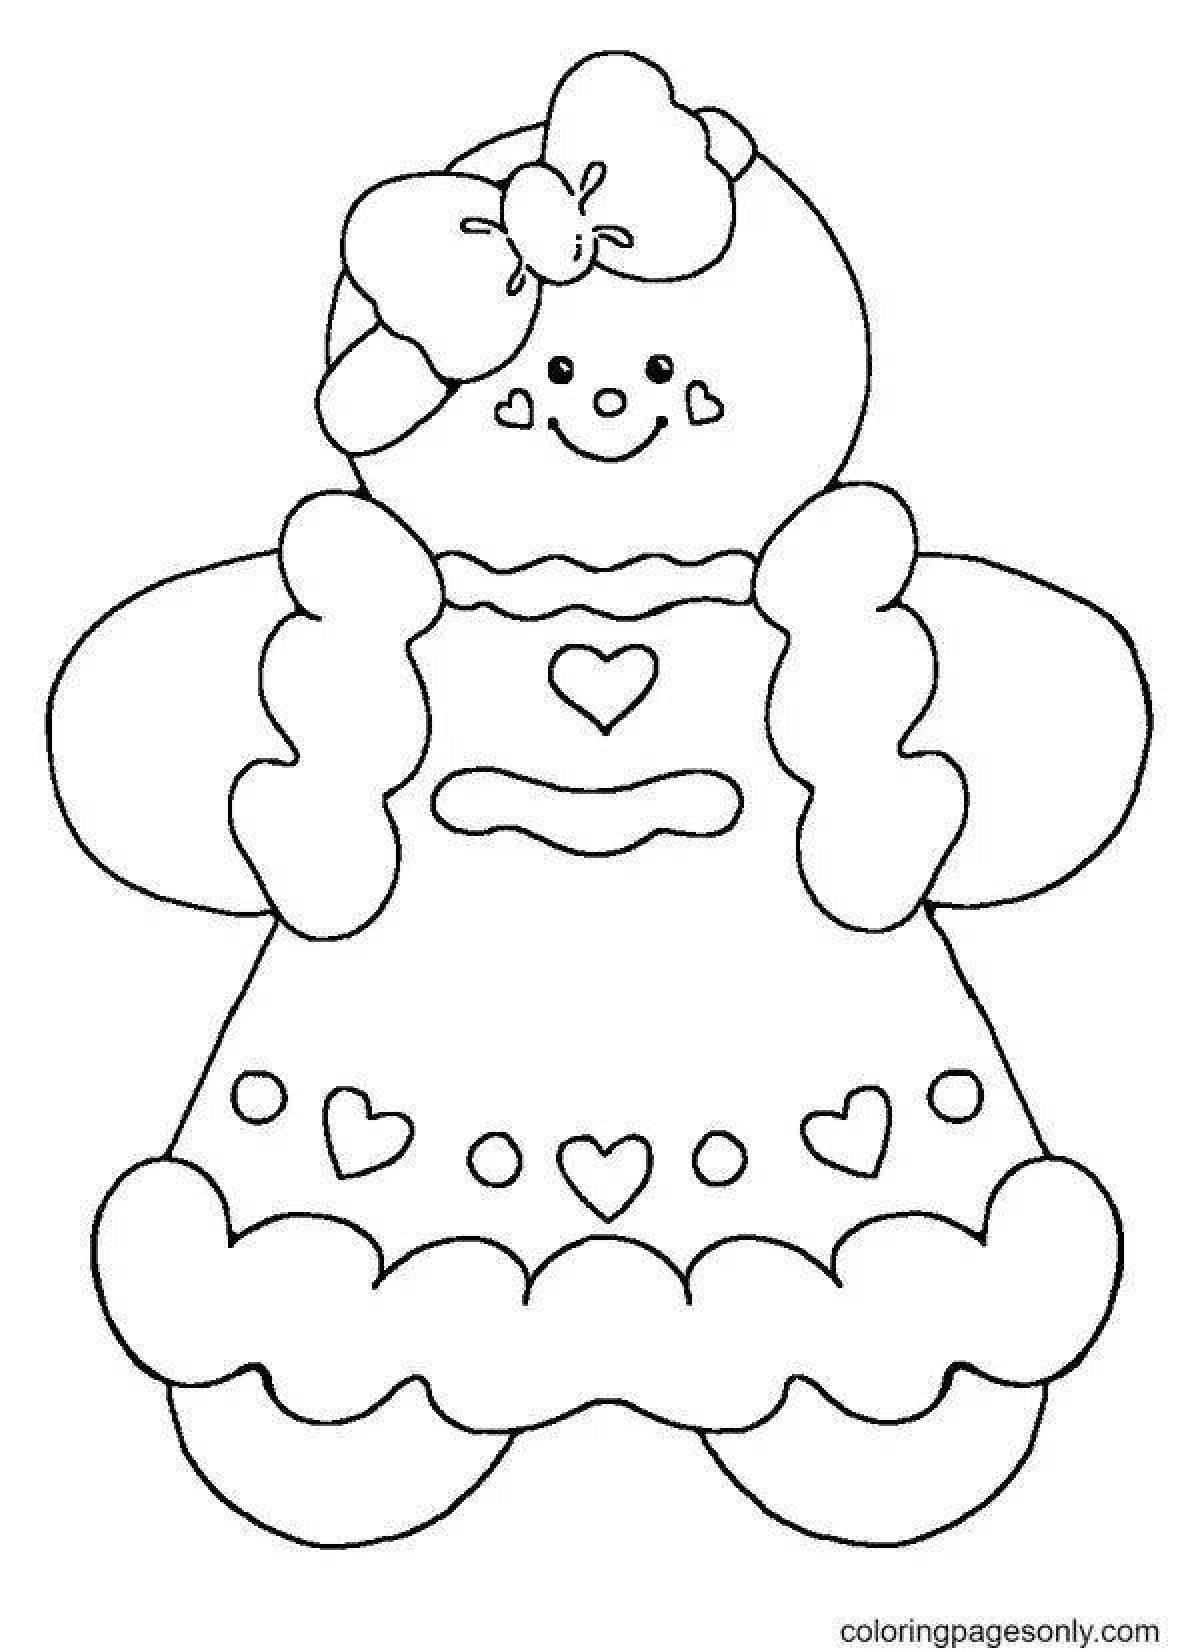 Christmas gingerbread coloring book